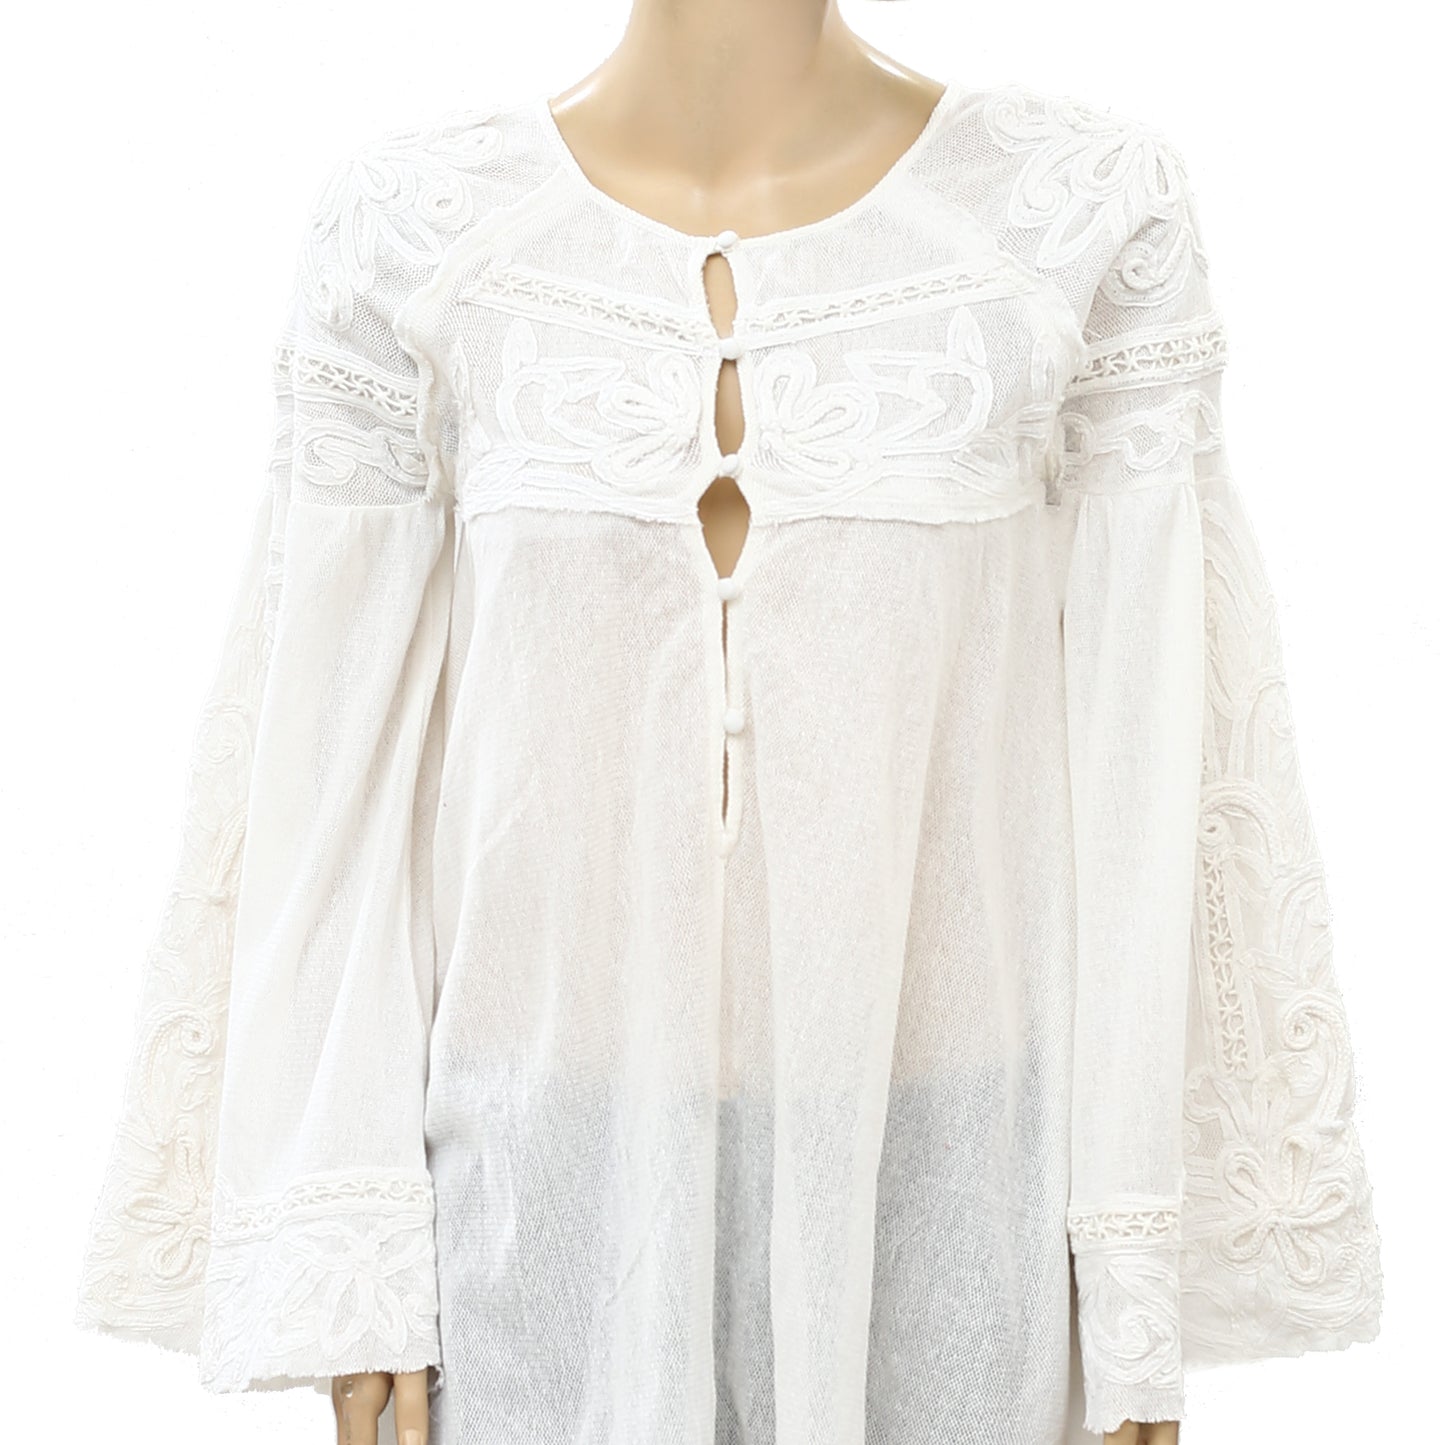 Free People Floral Embroidered Crochet Tunic Top